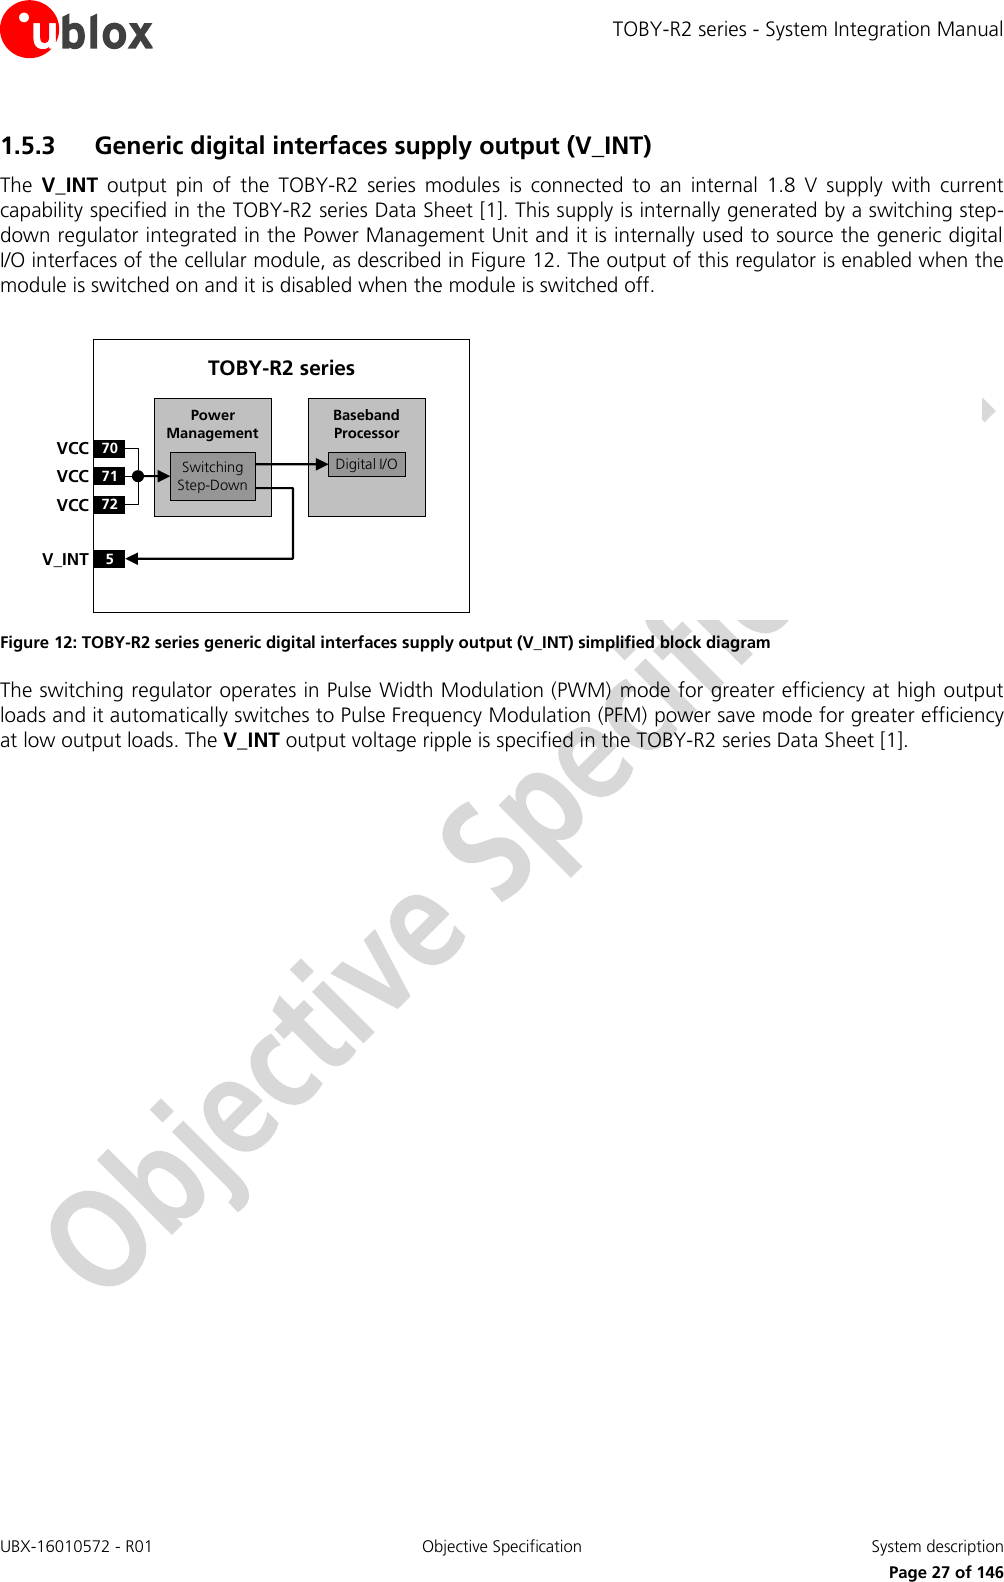 TOBY-R2 series - System Integration Manual UBX-16010572 - R01  Objective Specification  System description     Page 27 of 146 1.5.3 Generic digital interfaces supply output (V_INT)  The  V_INT  output  pin  of  the  TOBY-R2  series  modules  is  connected  to  an  internal  1.8  V  supply  with  current capability specified in the TOBY-R2 series Data Sheet [1]. This supply is internally generated by a switching step-down regulator integrated in the Power Management Unit and it is internally used to source the generic digital I/O interfaces of the cellular module, as described in Figure 12. The output of this regulator is enabled when the module is switched on and it is disabled when the module is switched off.  Baseband Processor70VCC71VCC72VCC5V_INTSwitchingStep-DownPower ManagementTOBY-R2 seriesDigital I/O Figure 12: TOBY-R2 series generic digital interfaces supply output (V_INT) simplified block diagram The switching regulator operates in Pulse Width Modulation (PWM)  mode for greater efficiency at high output loads and it automatically switches to Pulse Frequency Modulation (PFM) power save mode for greater efficiency at low output loads. The V_INT output voltage ripple is specified in the TOBY-R2 series Data Sheet [1].  